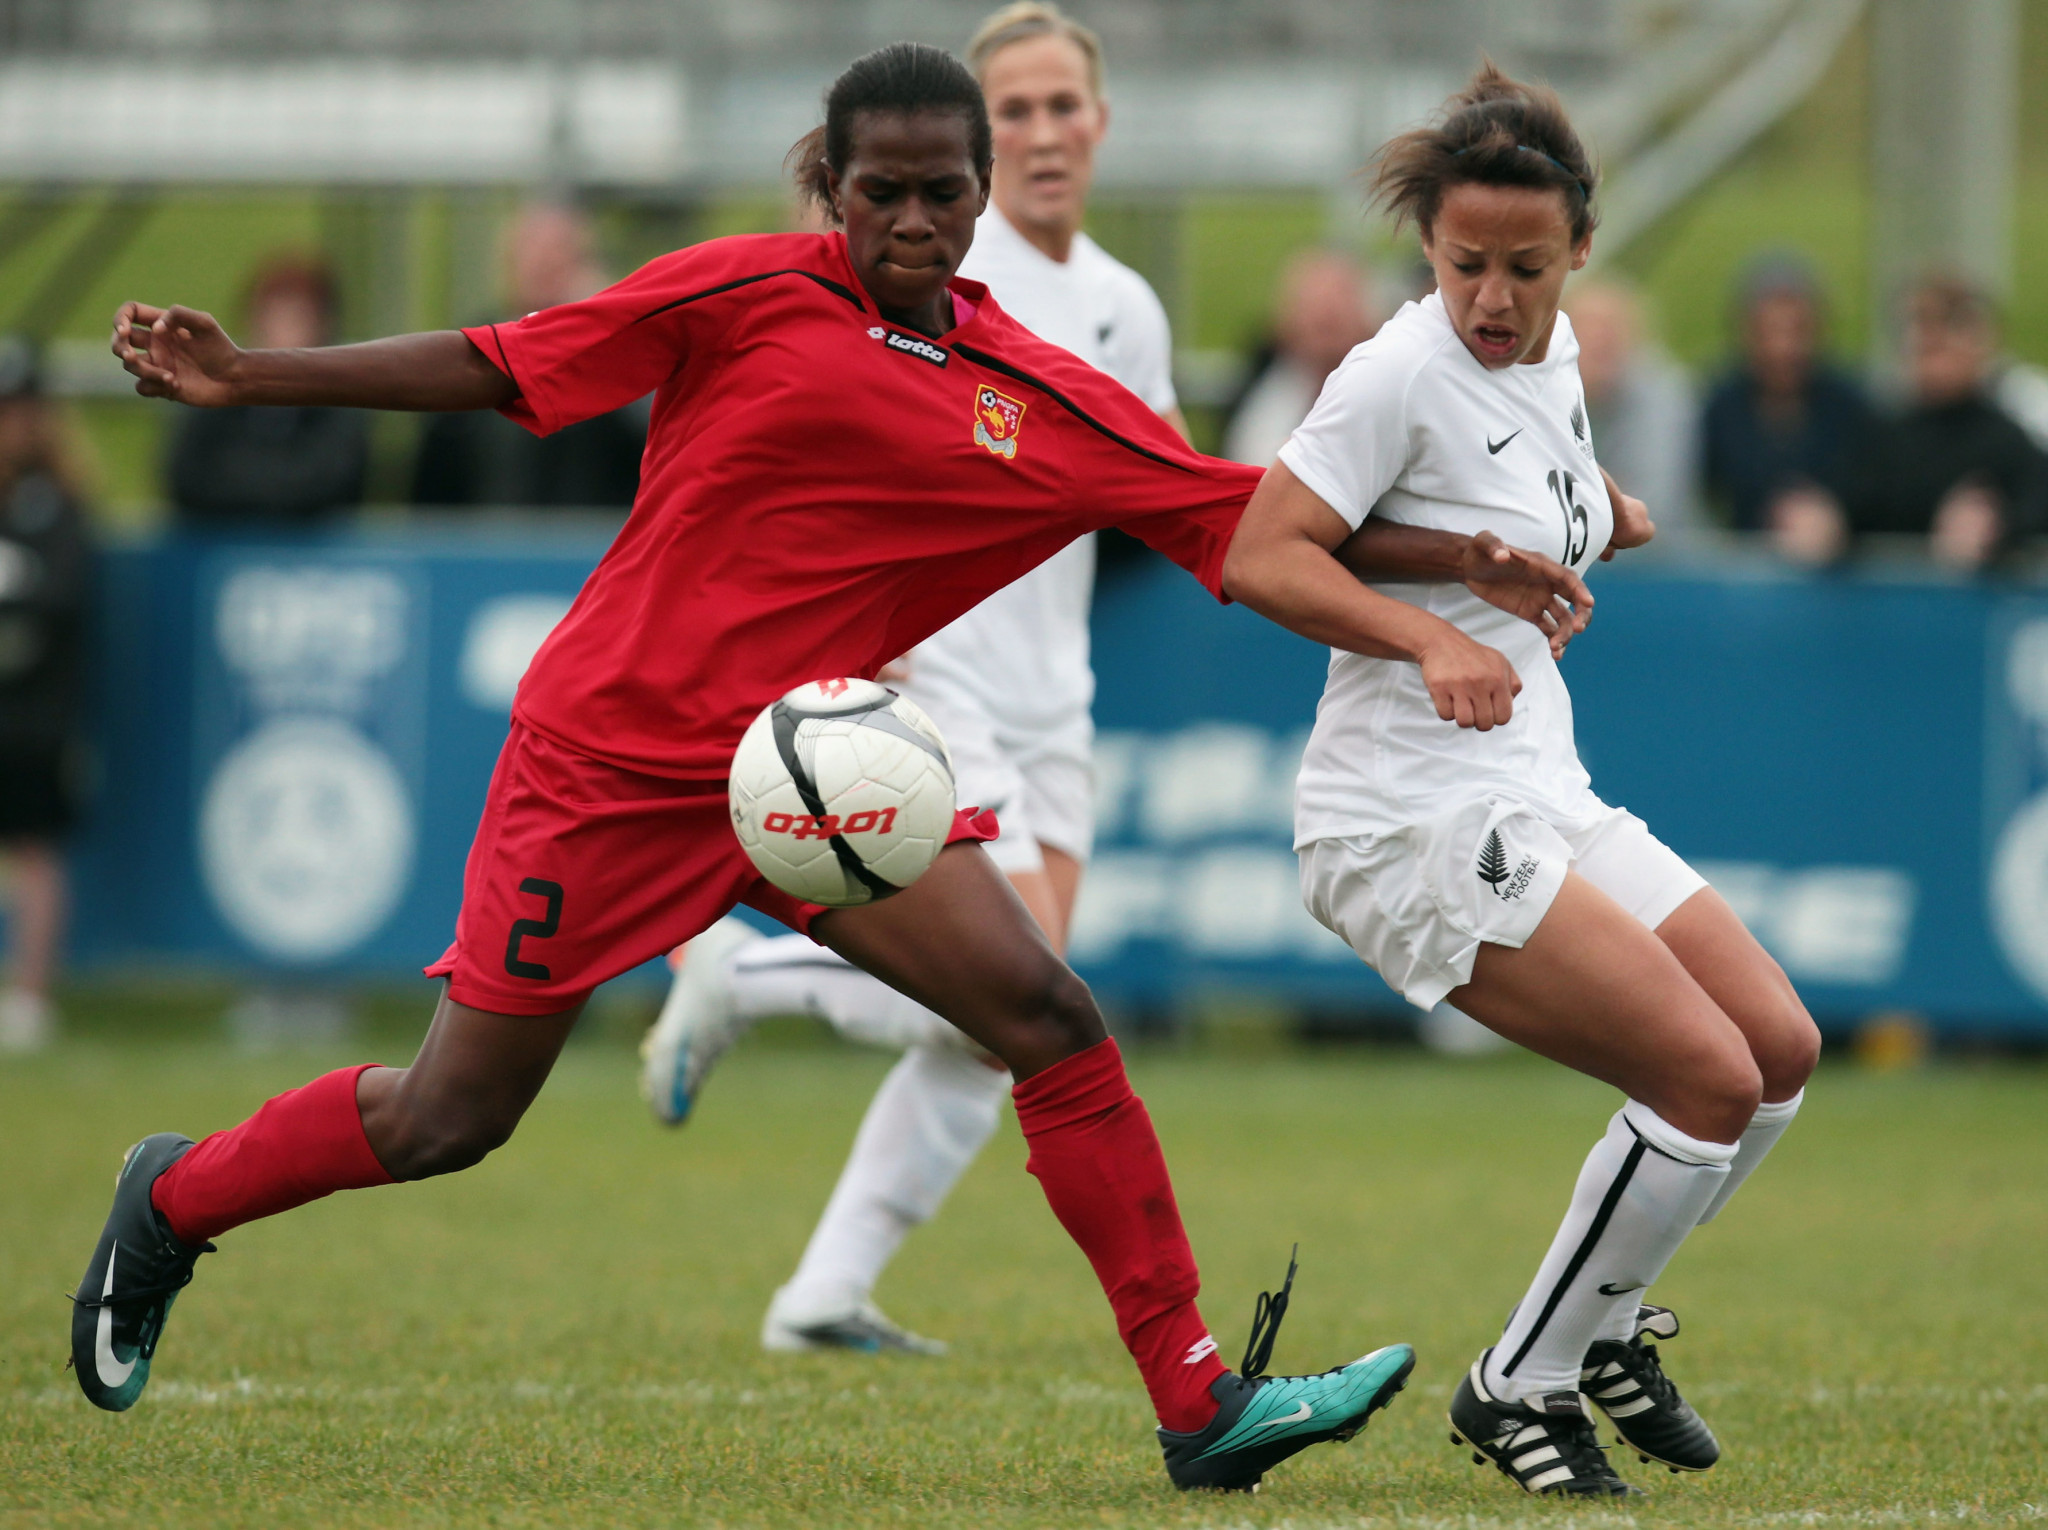 Semi-final line-up confirmed at OFC Women's Nations Cup